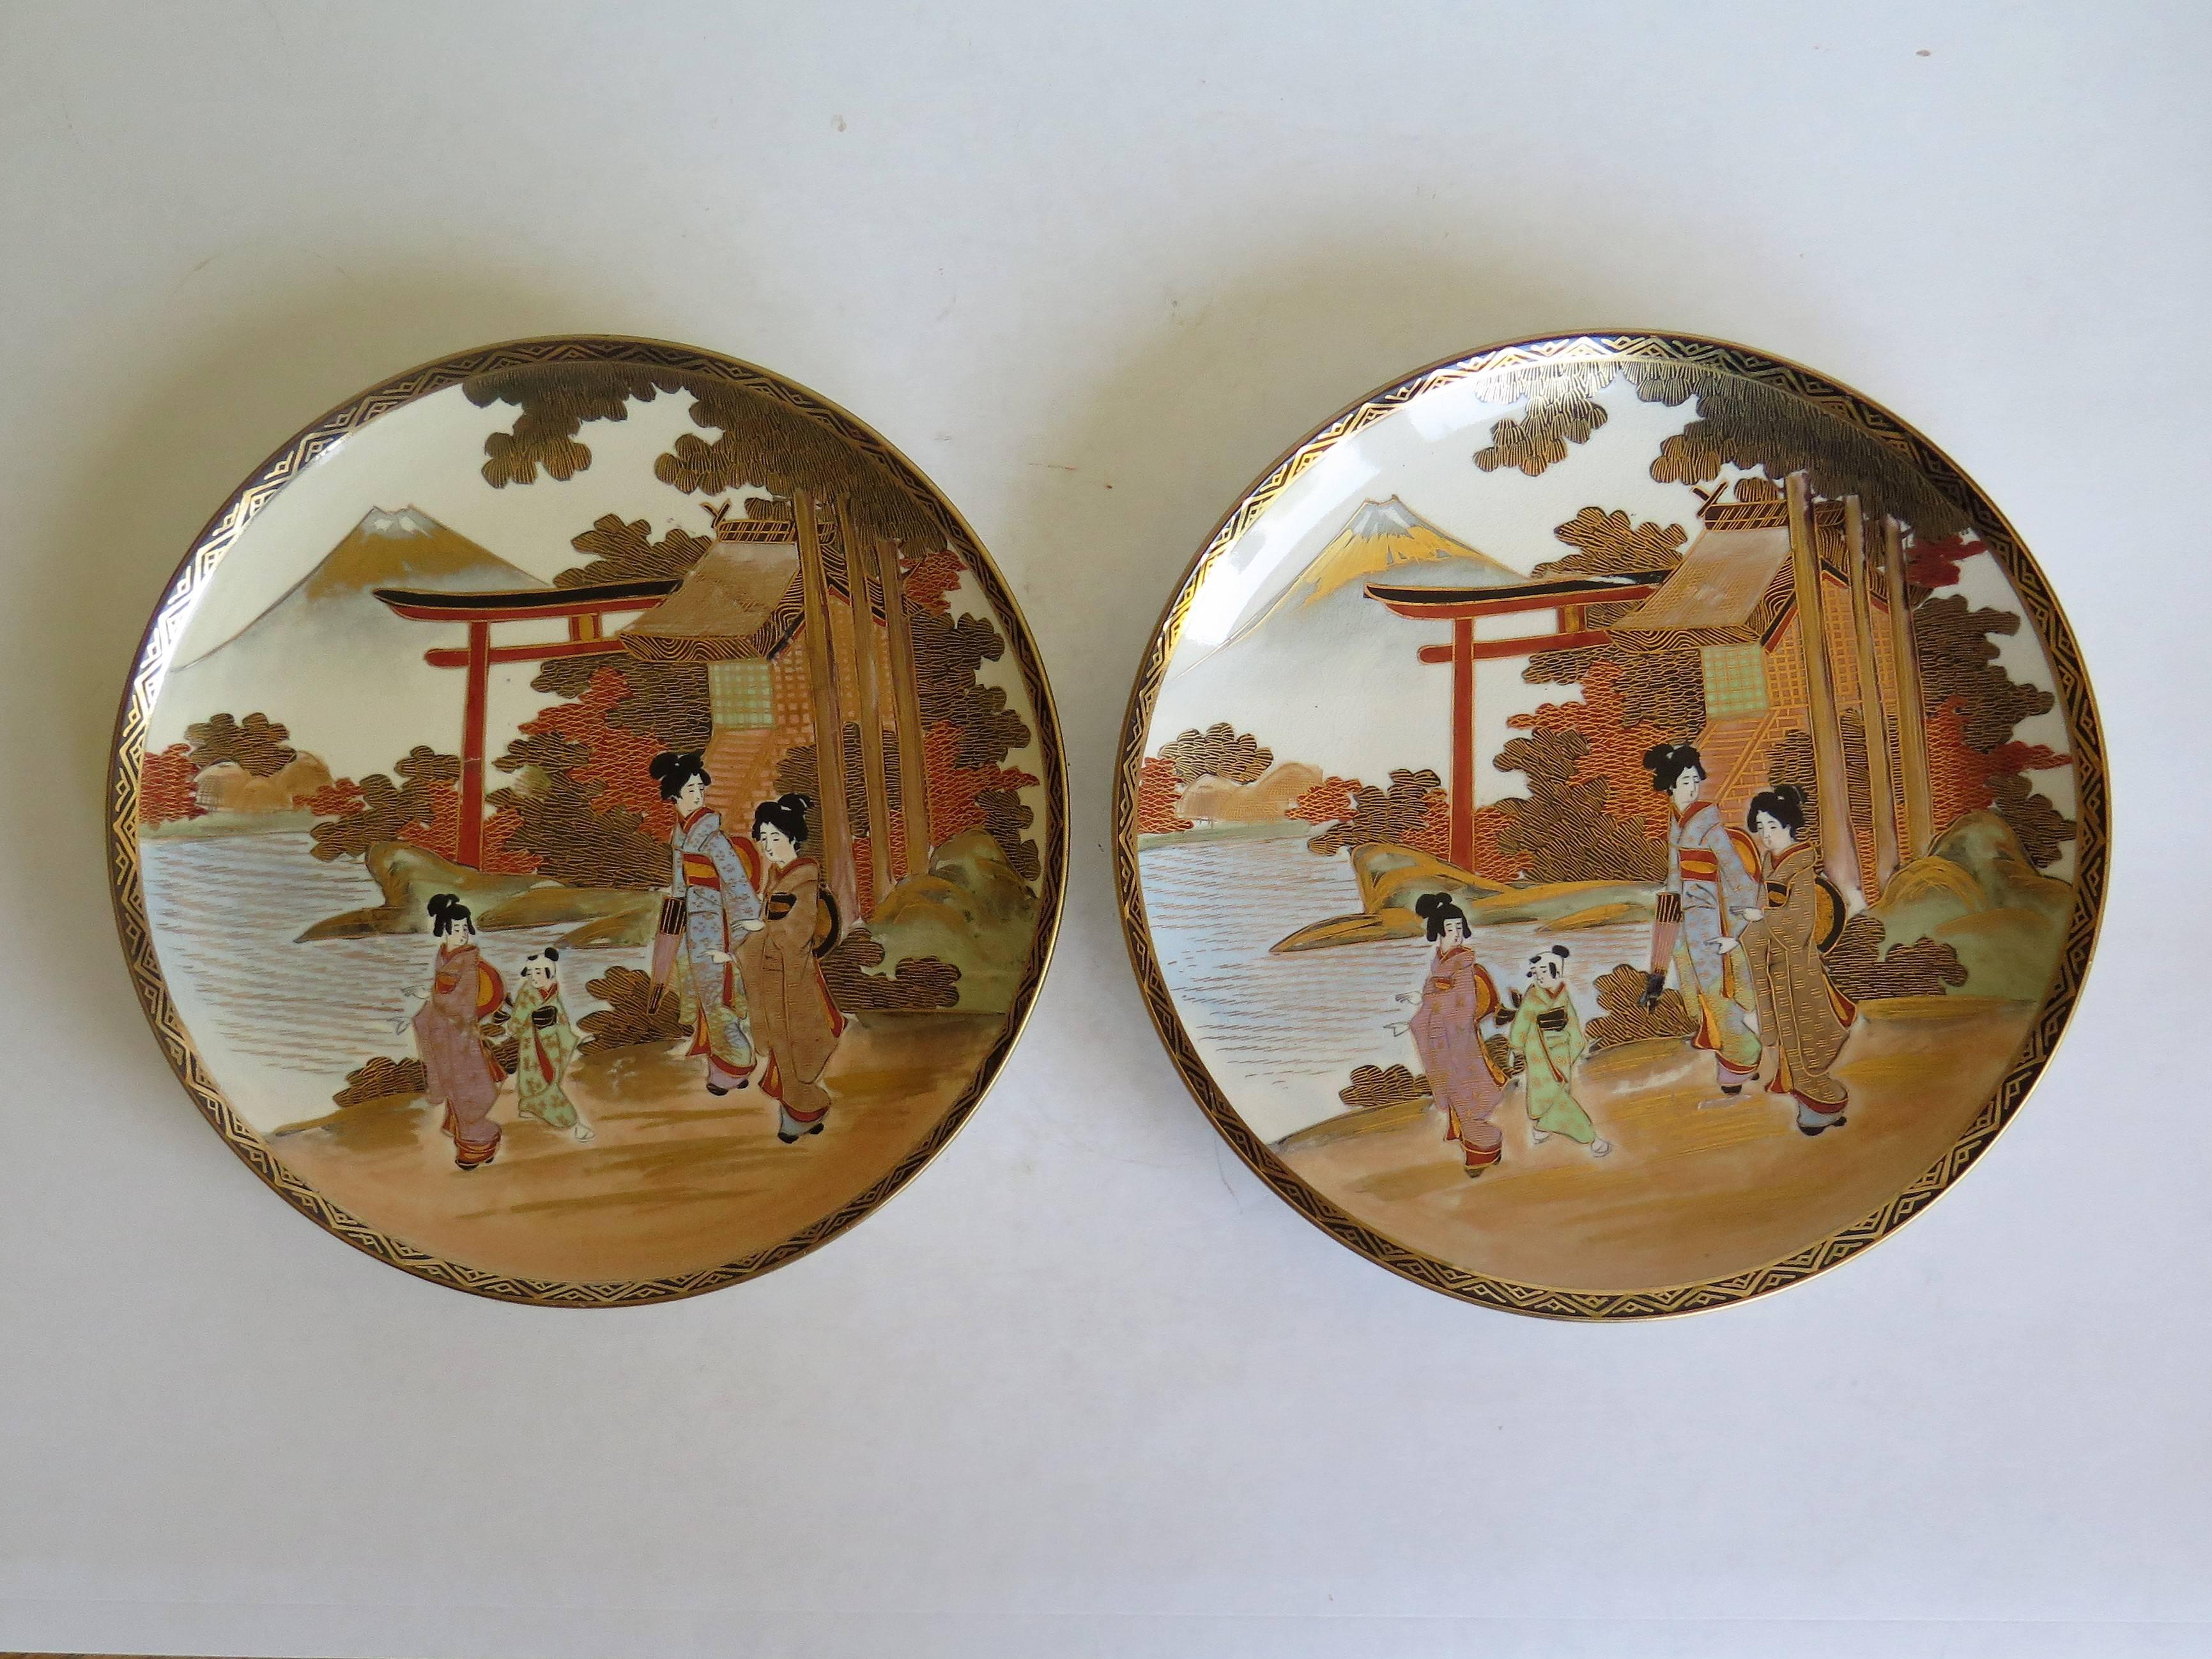 These are a good pair of Japanese earthenware plates with hand-painted and gilded Satsuma decoration which we date to the late Meiji period, circa 1900.

Each plate is circular, well hand decorated with a landscape scene depicting women wearing